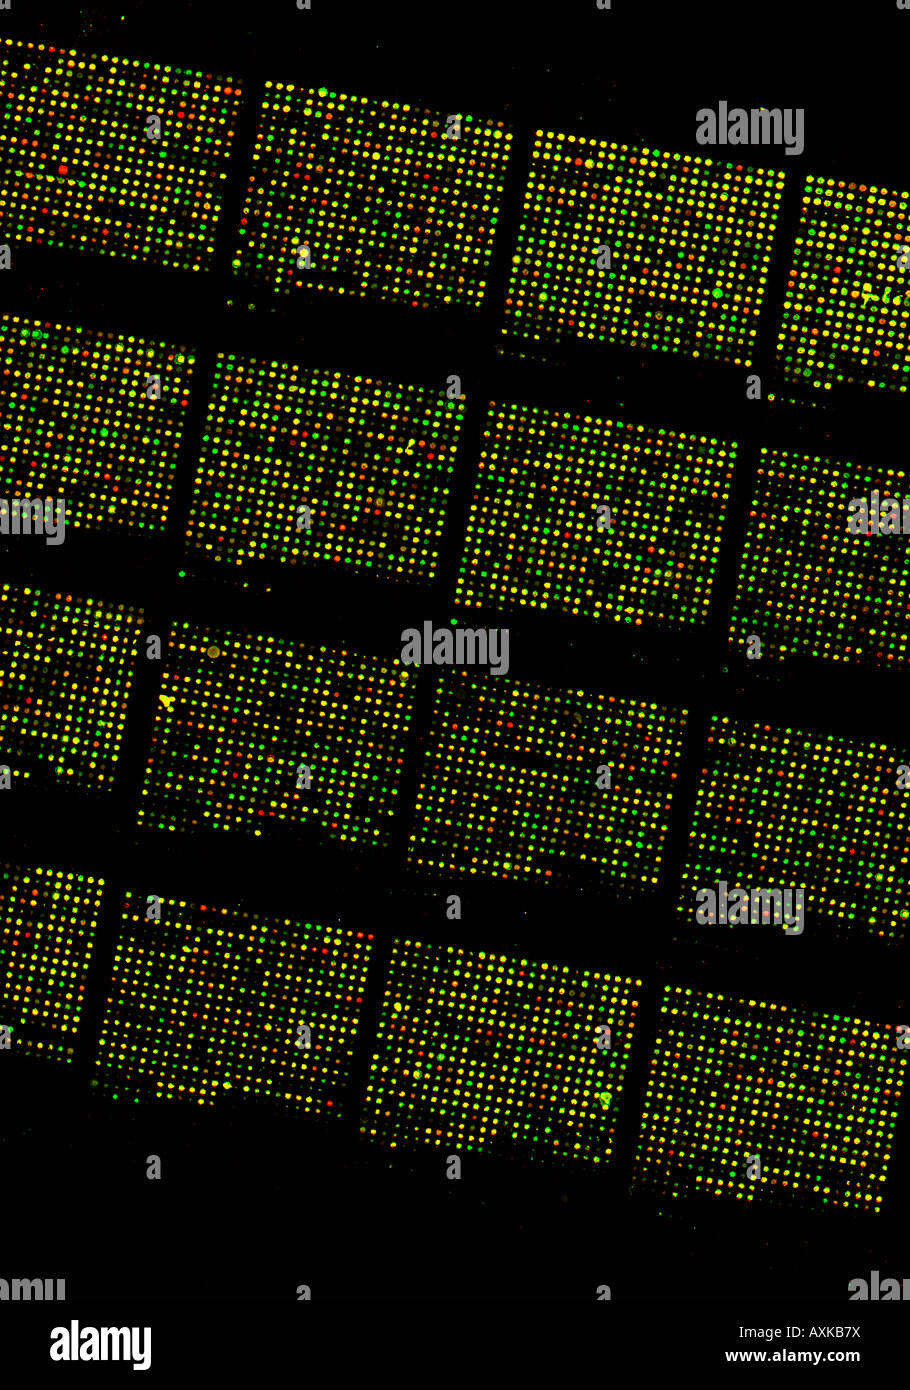 Micro Array DNA Chip, human genome structure Stock Photo